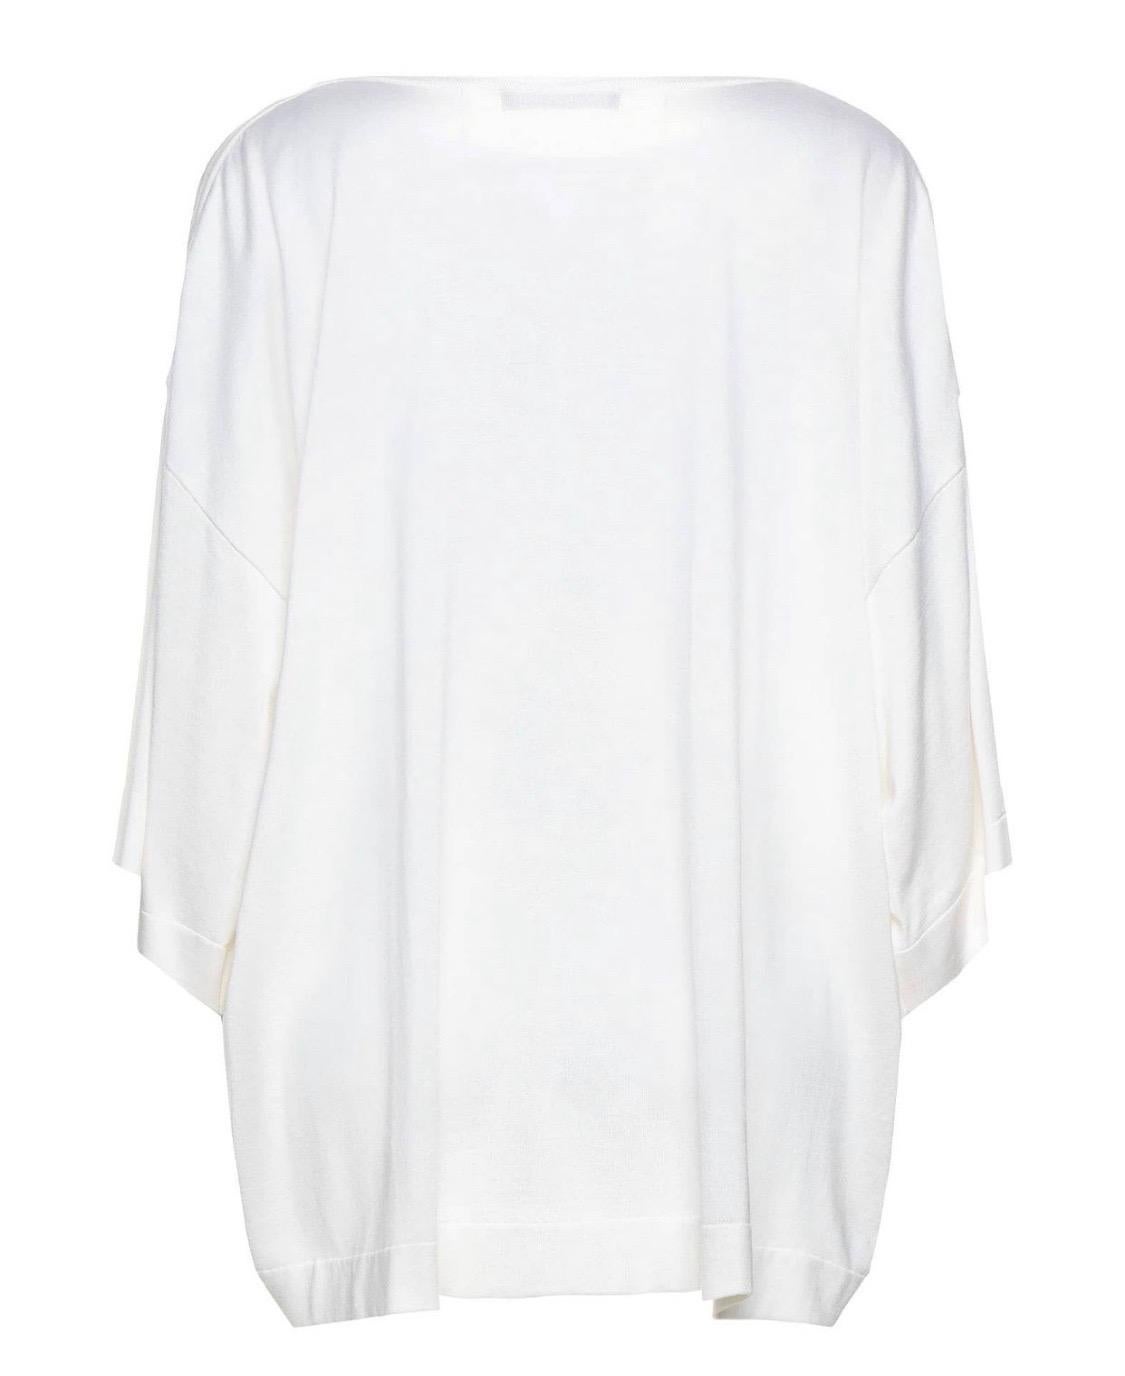 DOLCE & GABBANA
Gorgeous brand new with tags, 100% Authentic Dolce & Gabbana crafted from pure silk, it comes in off-white and flaunts a 'Majolica' print on the front. This oversized top has long sleeves, round neck and a relaxed fit.
Model: